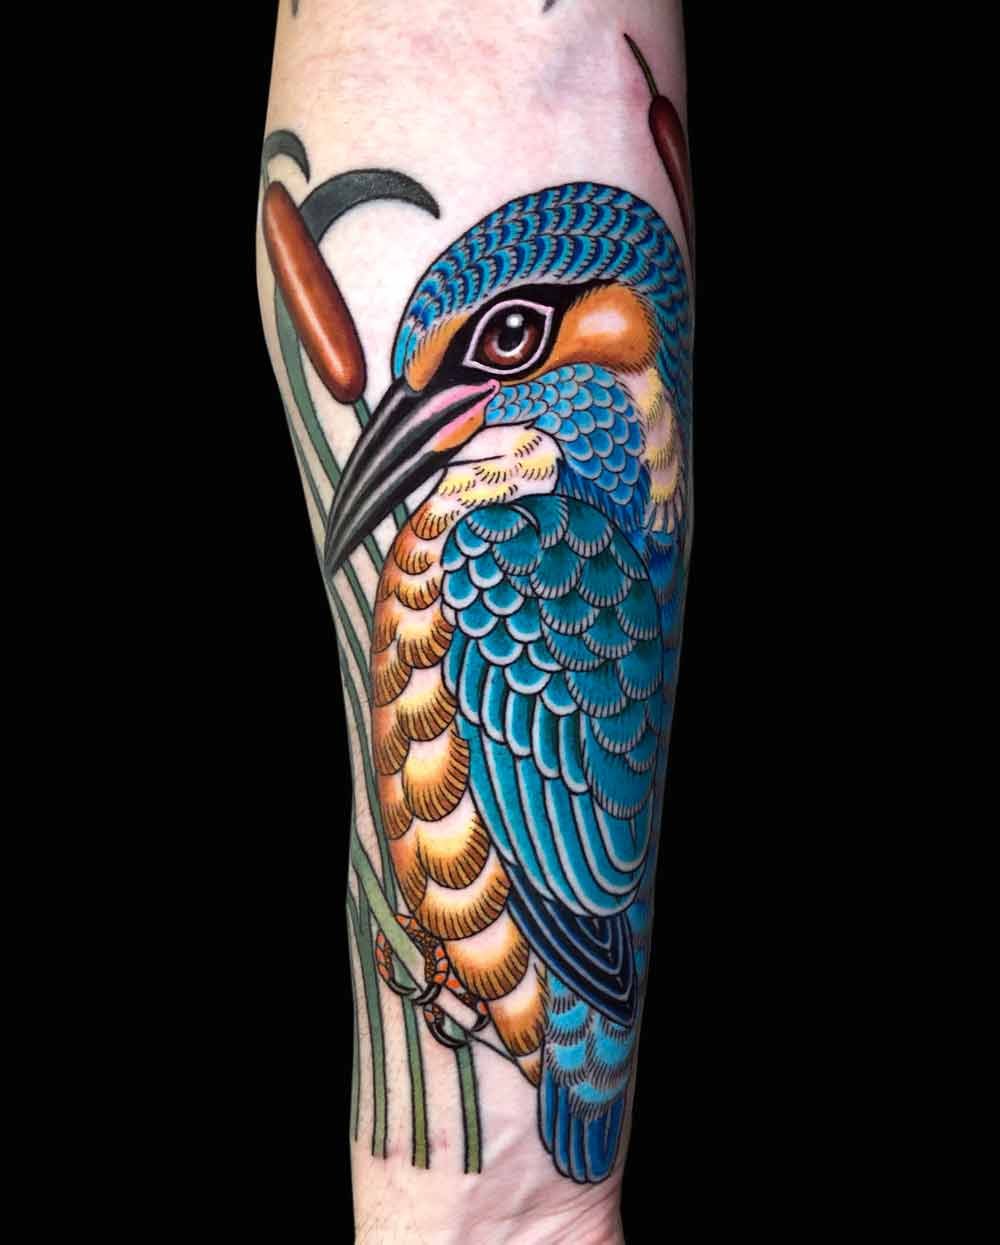 Kingfisher flash (and stencil) by Ryan Baranikow at Glasshouse Ink, South  Australia : r/tattoos